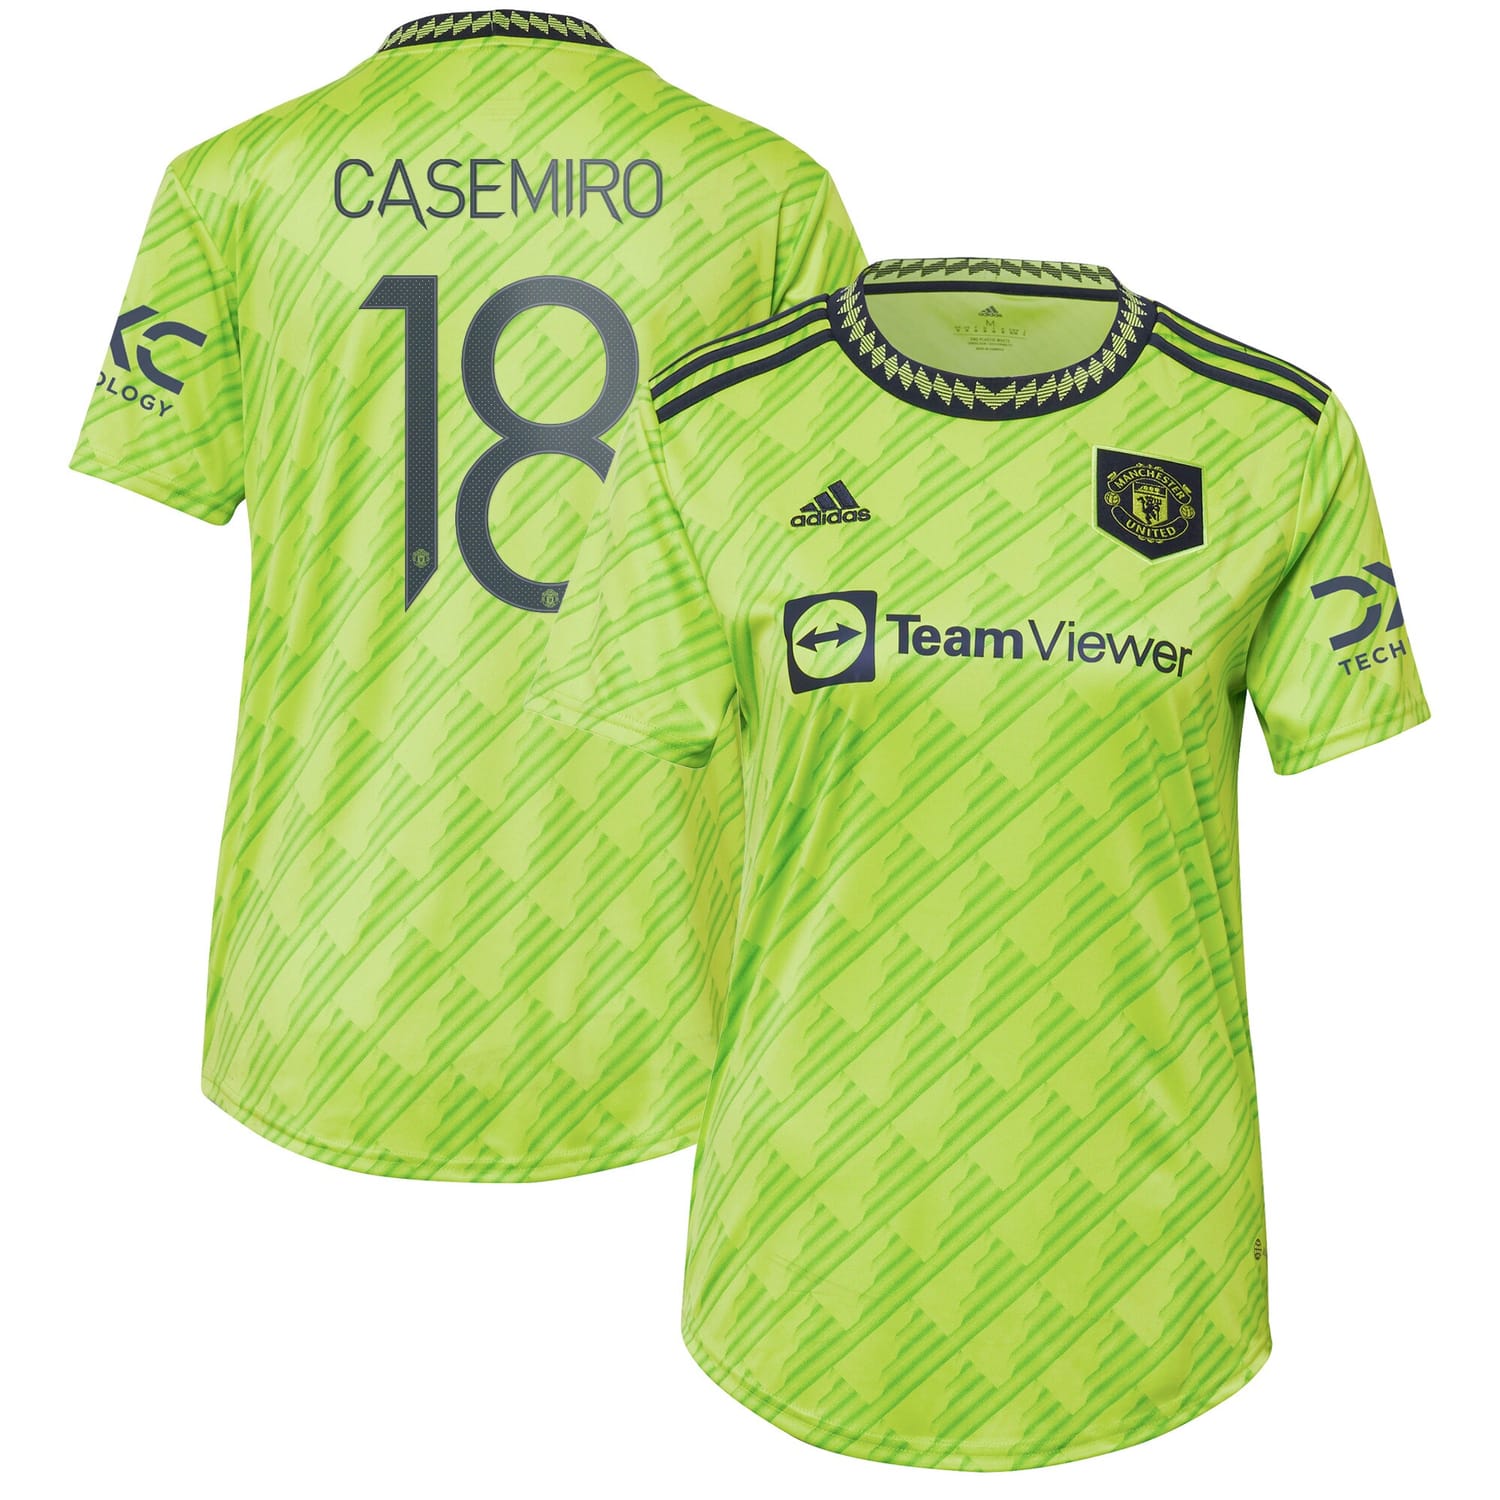 Premier League Manchester United Third Cup Jersey Shirt 2022-23 player Casemiro 18 printing for Women